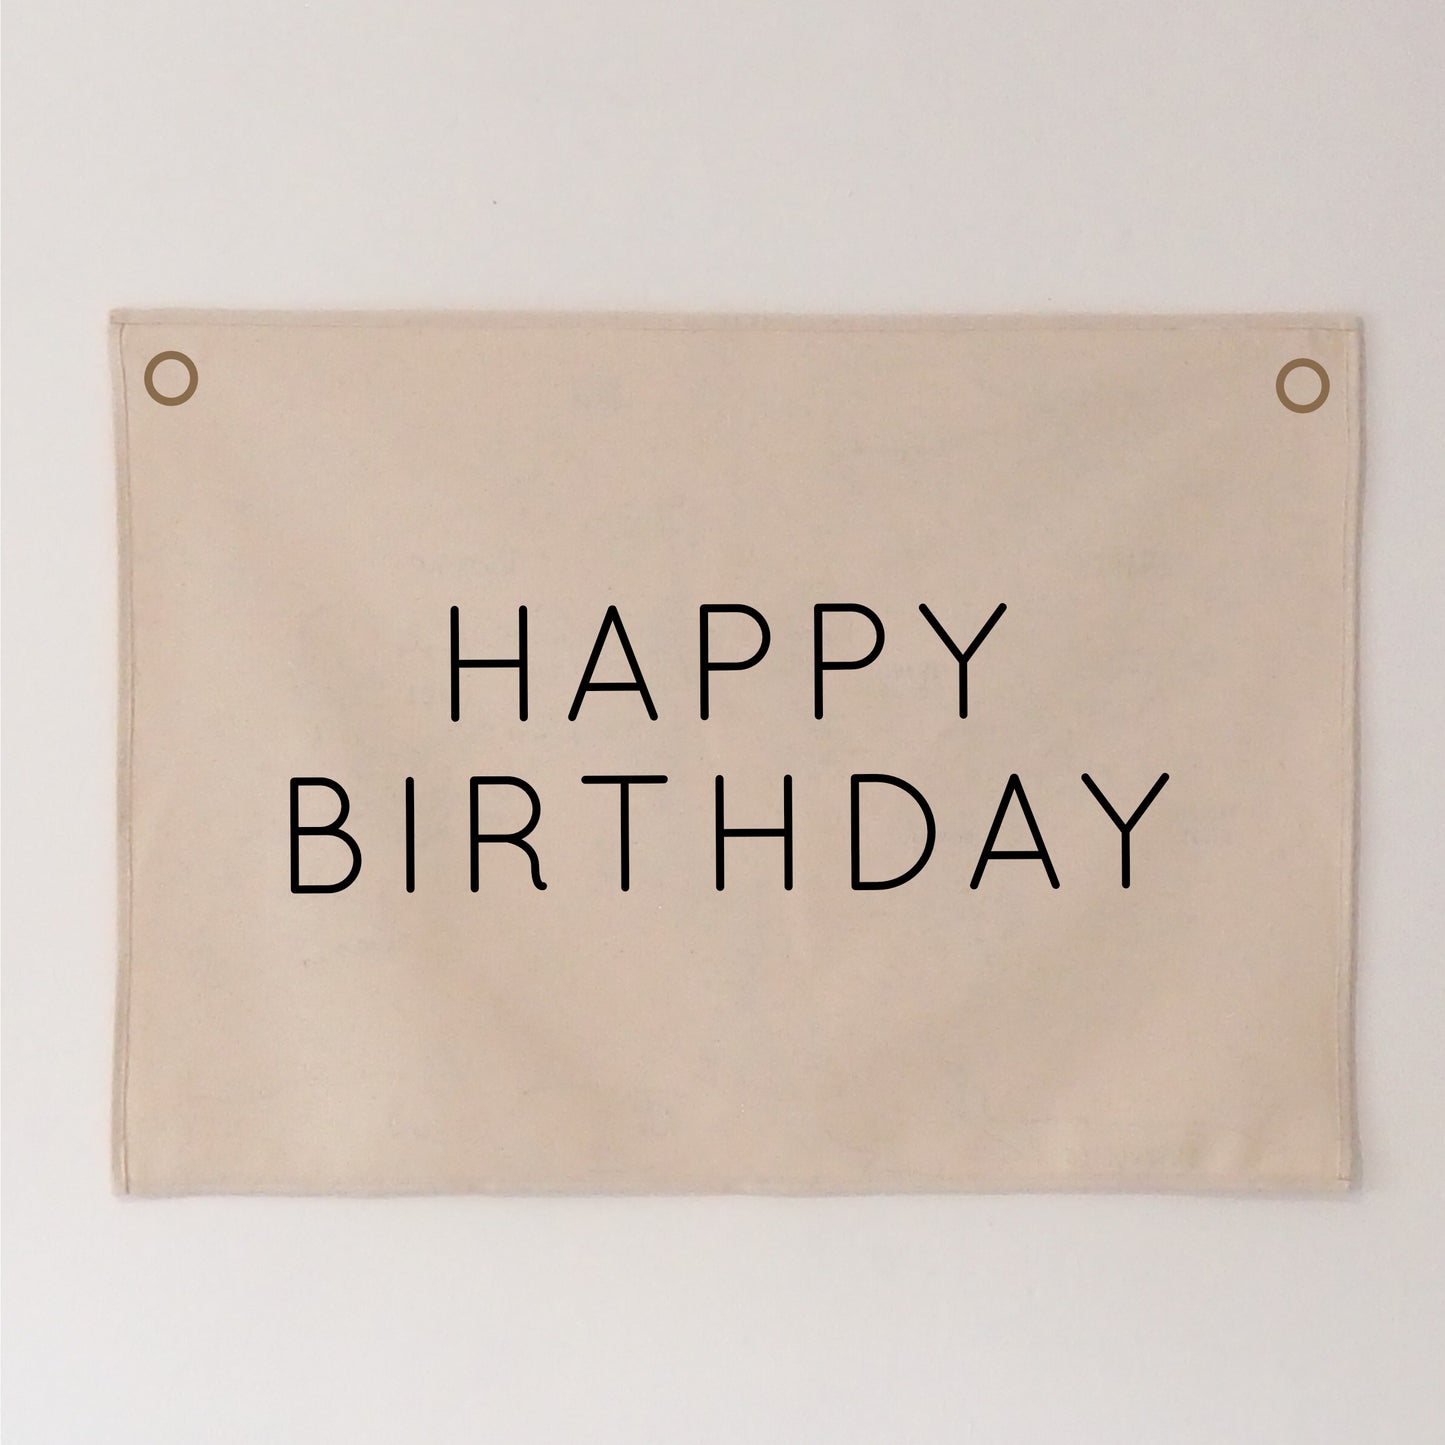 Personalised Happy Birthday Wall Hanging 50x70cm Narrow Font - more layouts and colours available.